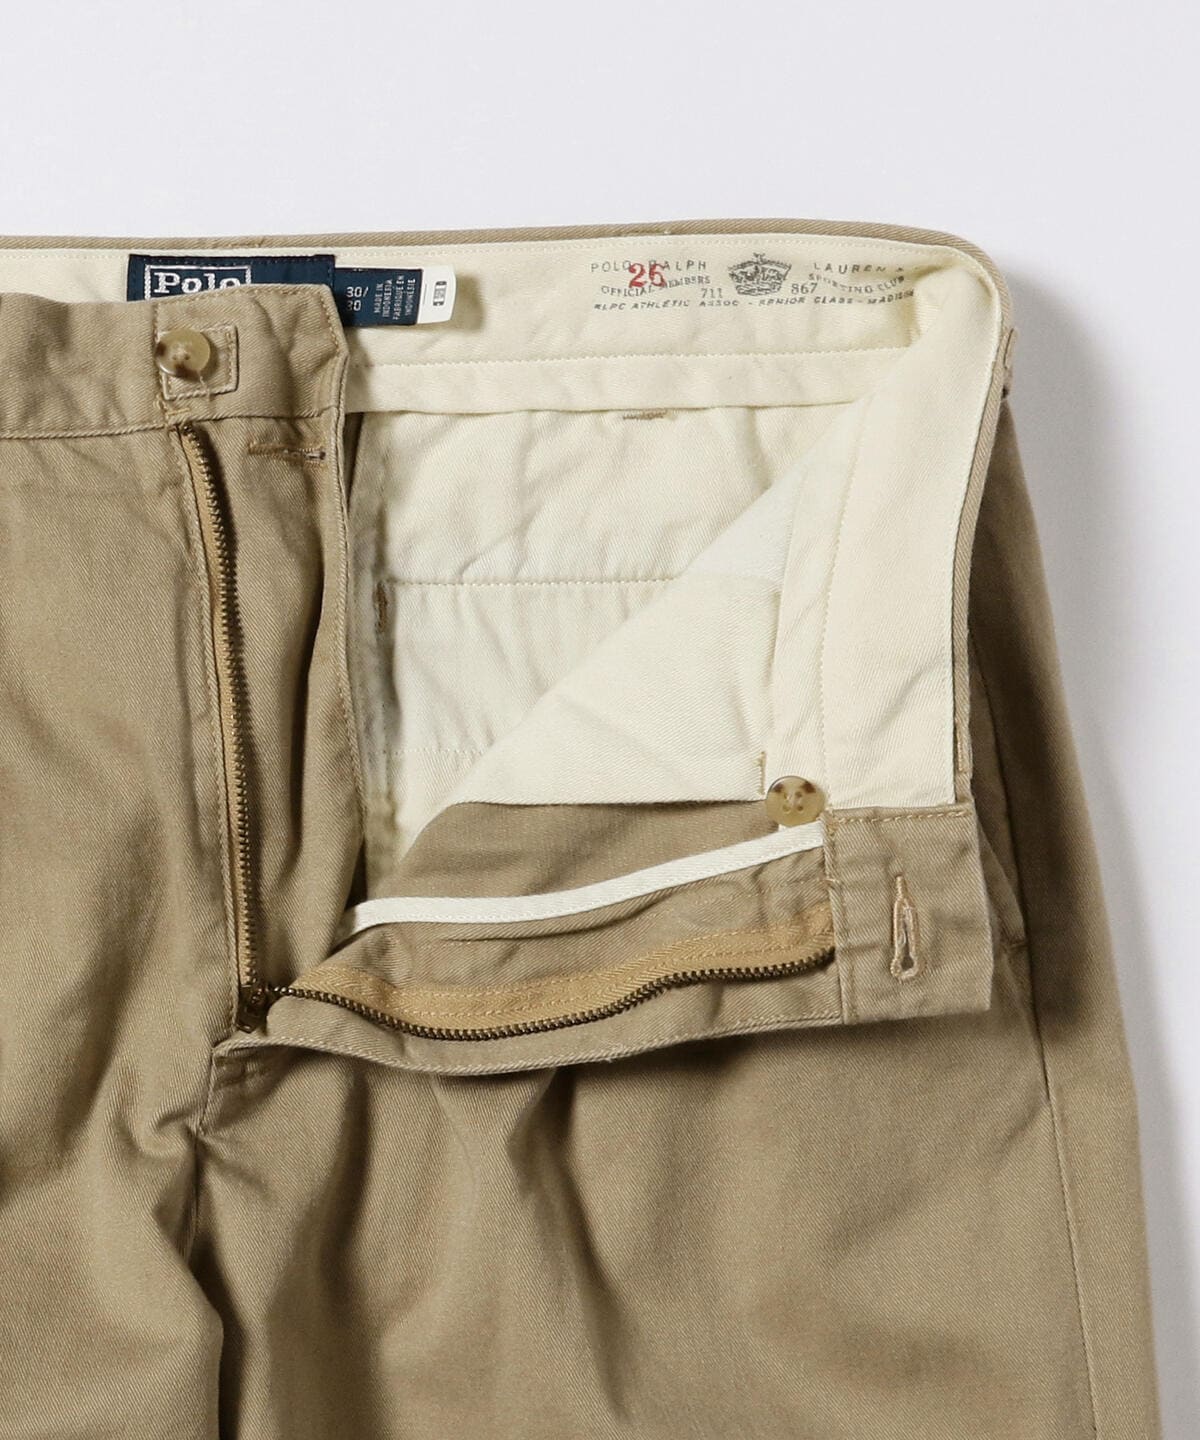 BEAMS（ビームス）POLO RALPH LAUREN for BEAMS / Cotton Twill 2Pleat 